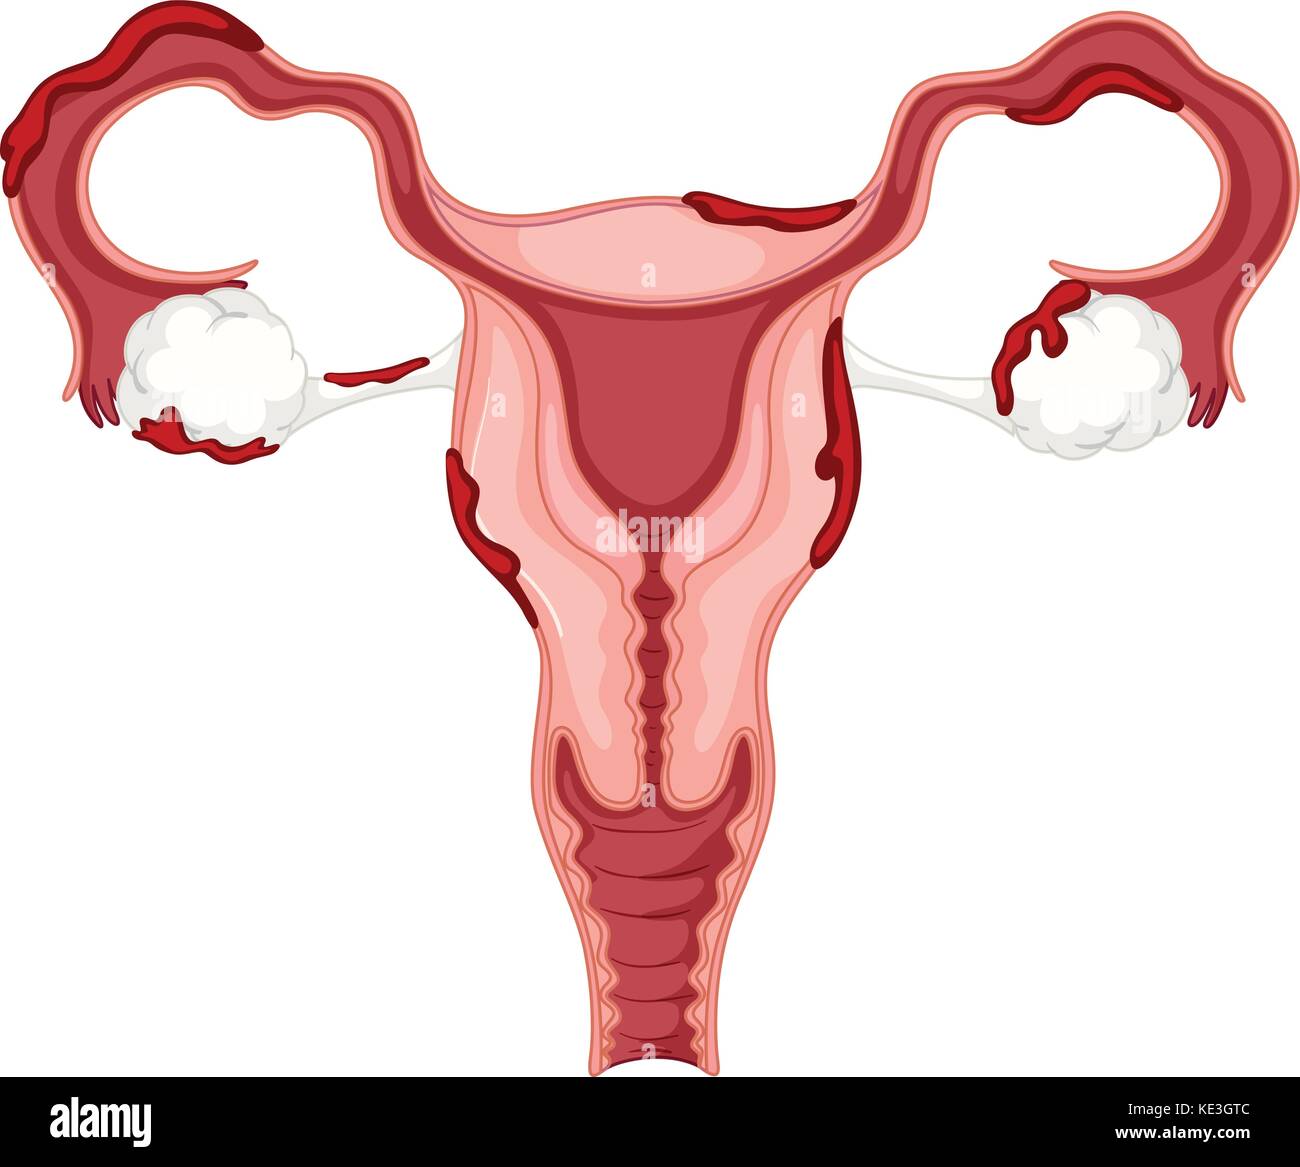 Diagram of woman ovary with endometriosis illustration Stock Vector